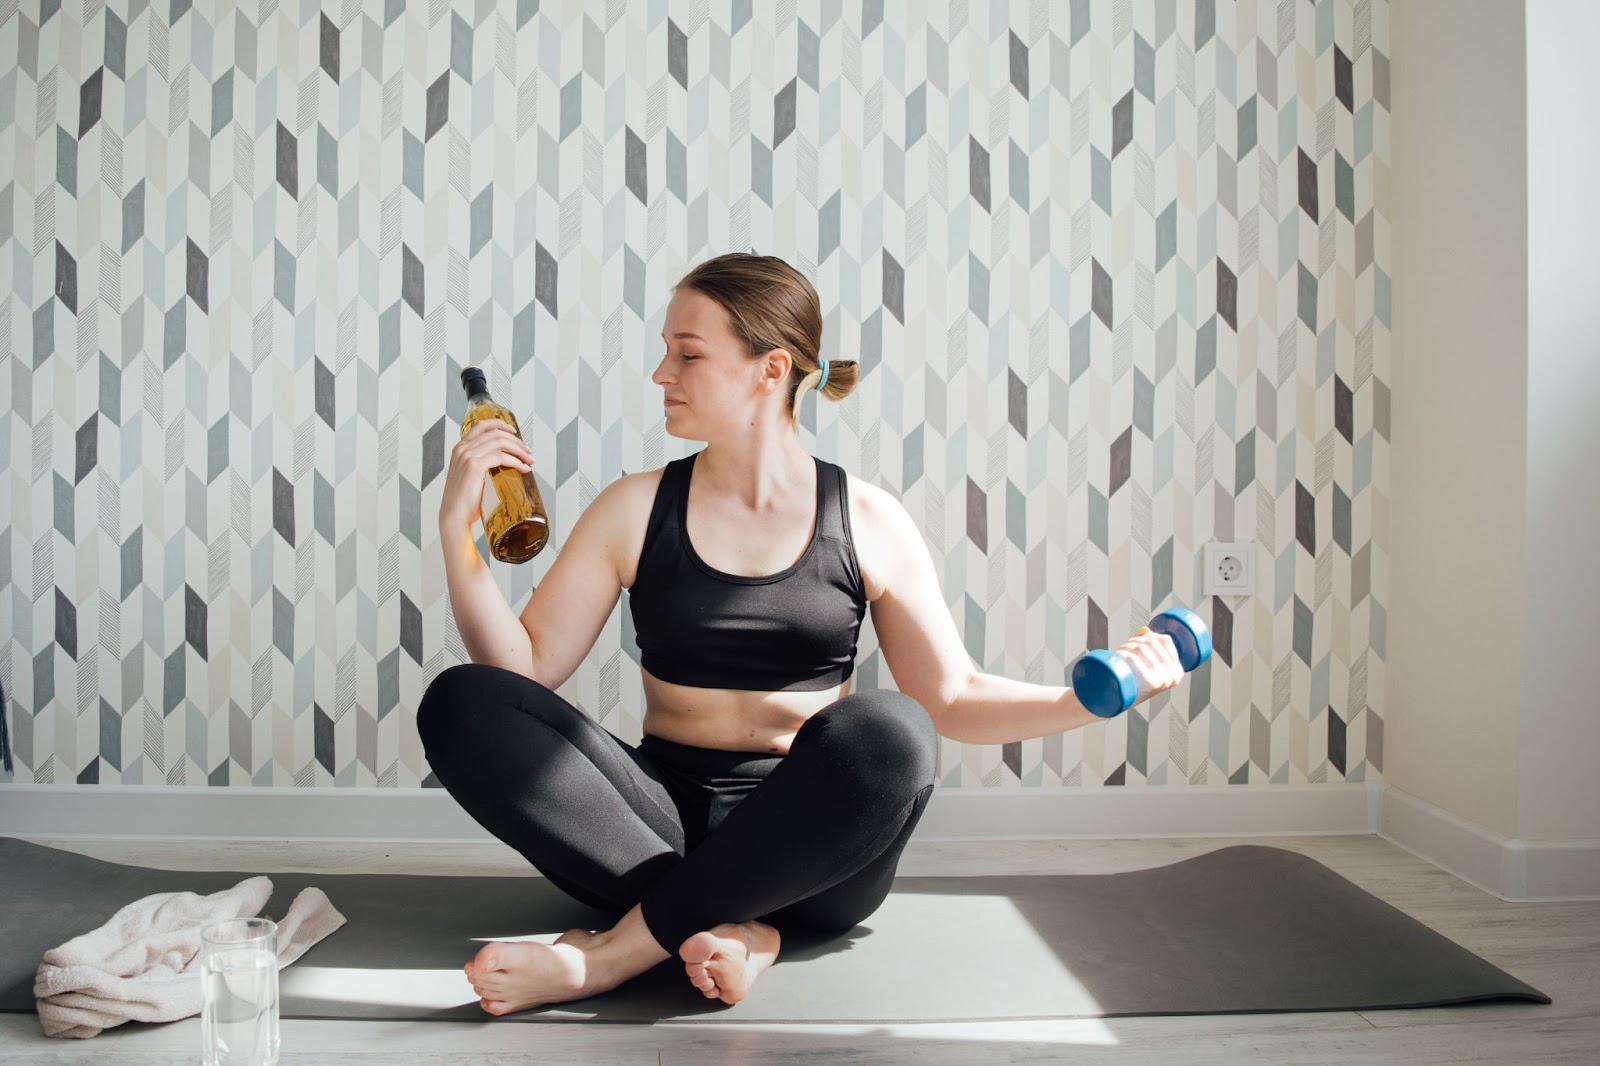 Fit woman dressed in exercise gear deciding to drink alcohol or work out